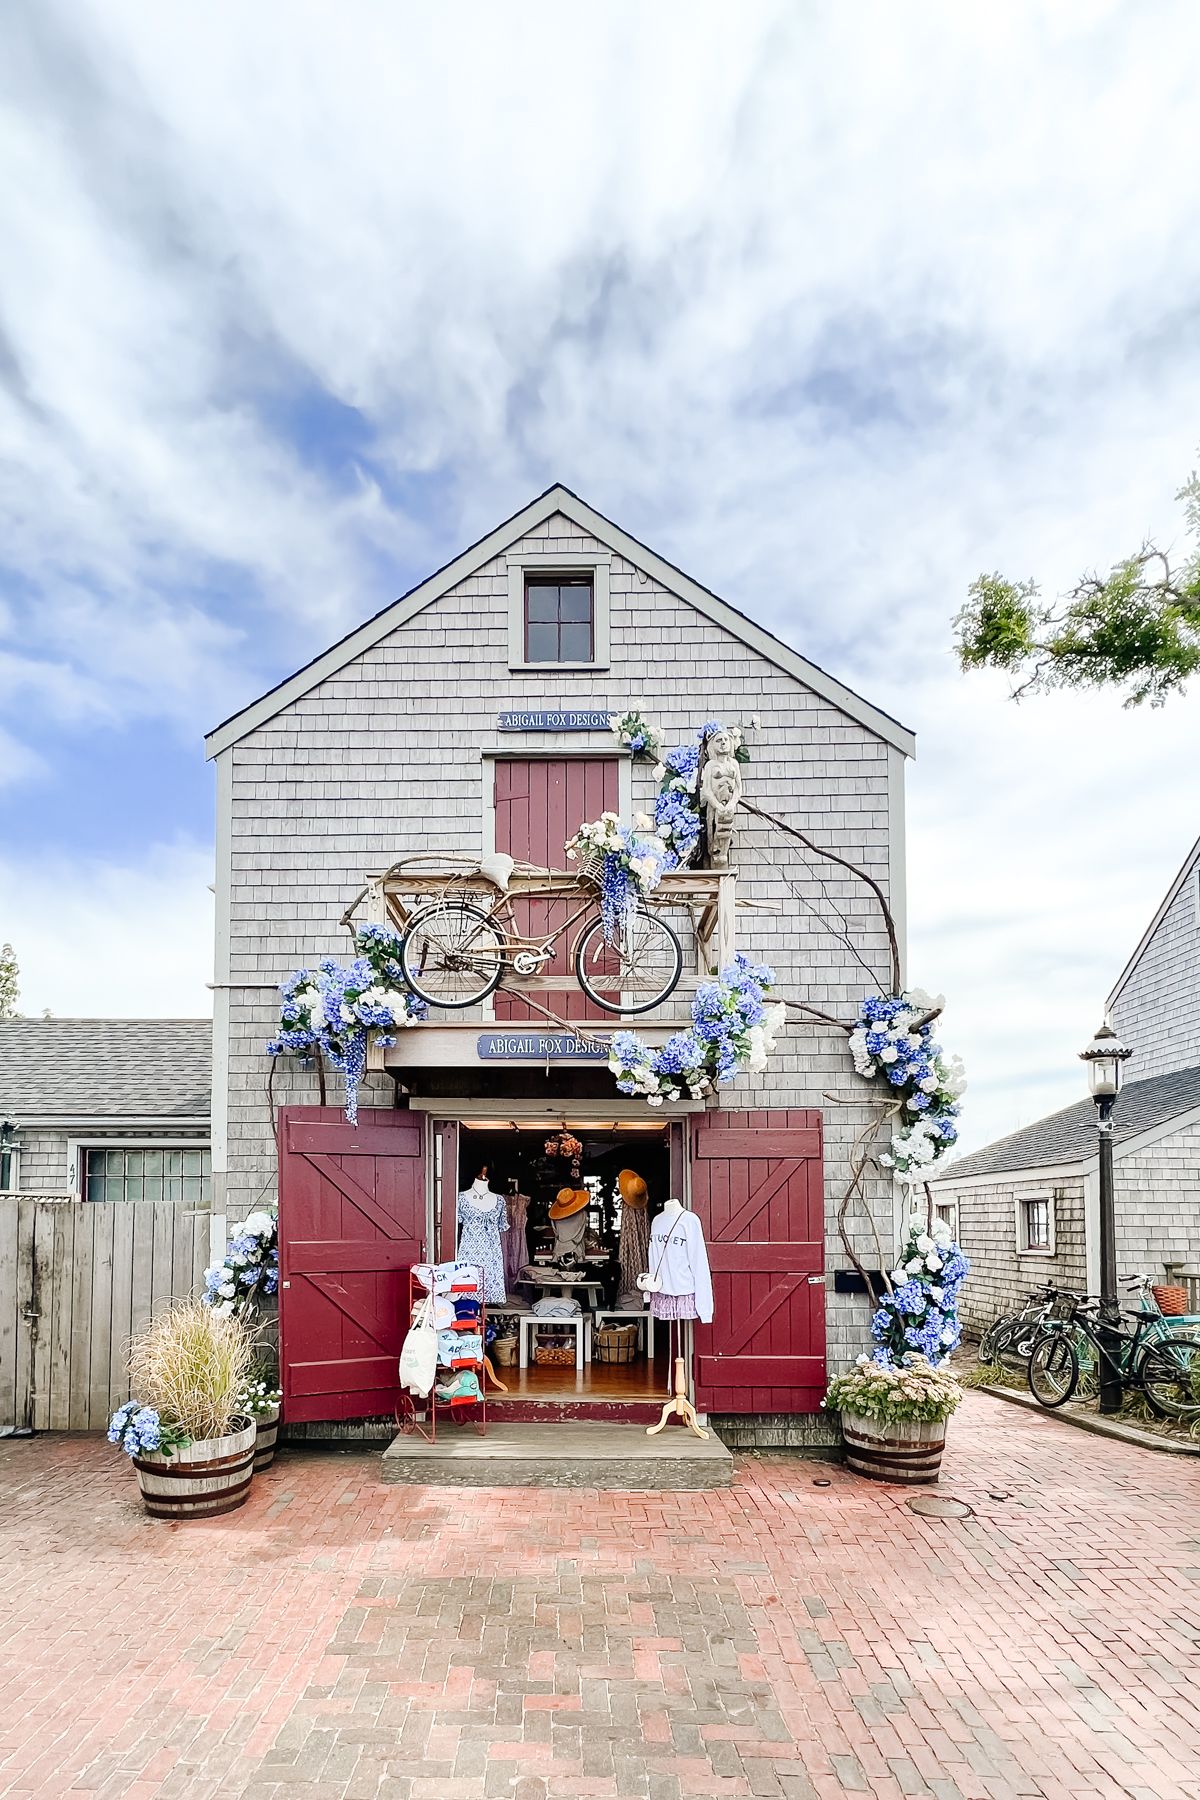 A storefront with open doors, and hydrangeas crawling up the front, in a guide to Things to do on Nantucket